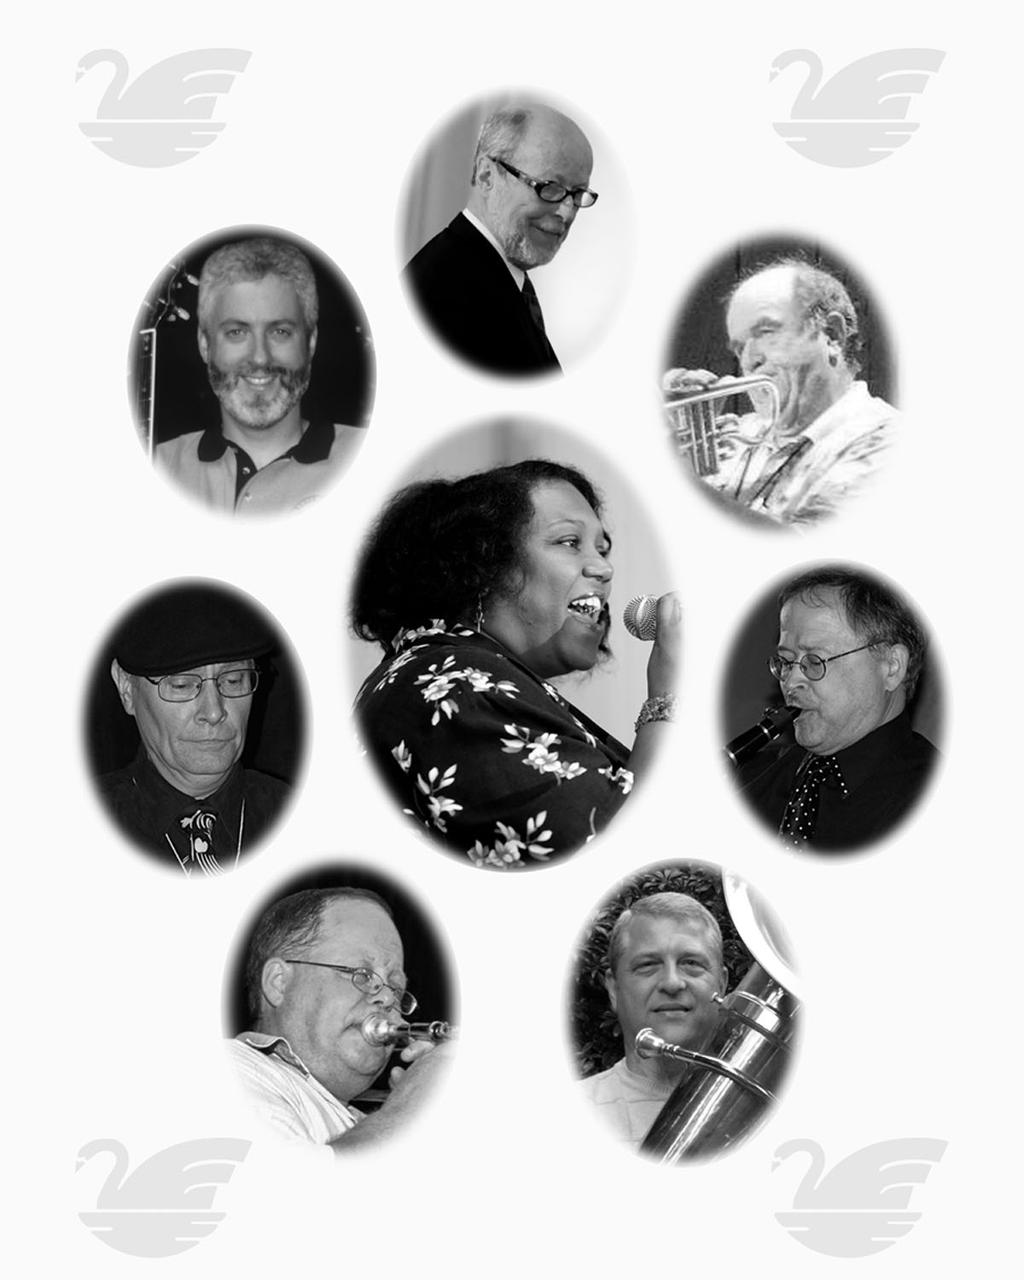 October 2012 Volume 37, Number 08 OREGON S BLACK SWAN CLASSIC JAZZ BAND ADDS By Rod Belcher BRASS STARS BARR AND LOOMIS PLUS MARILYN KELLER FOR OCTOBER 21 DATE.